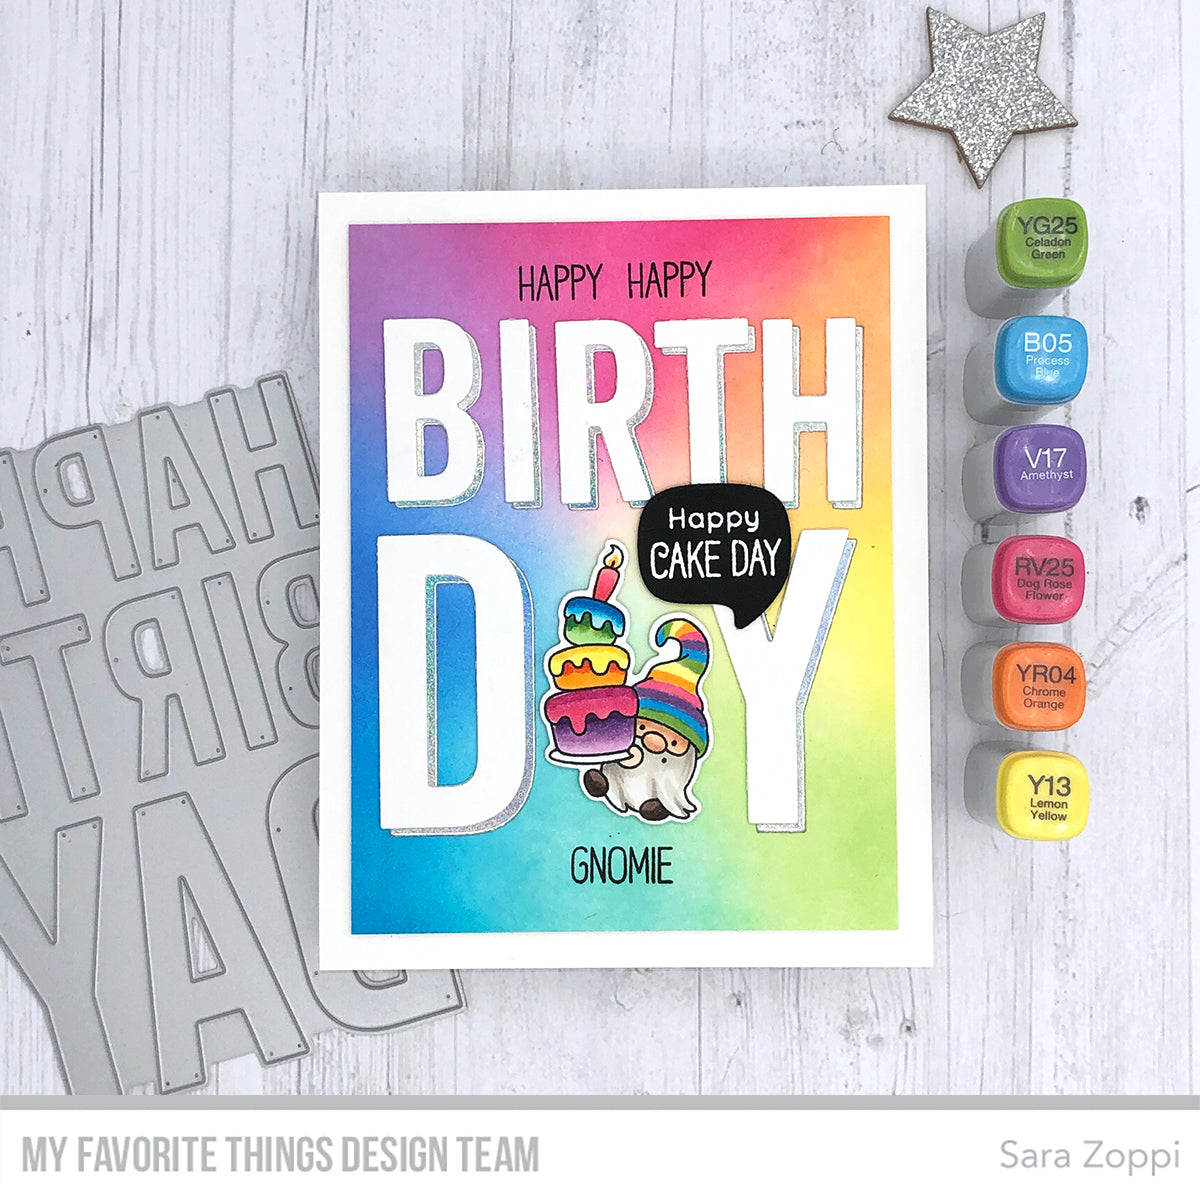 Handmade card from Sara Zoppi featuring products from My Favorite Things #mftstamps